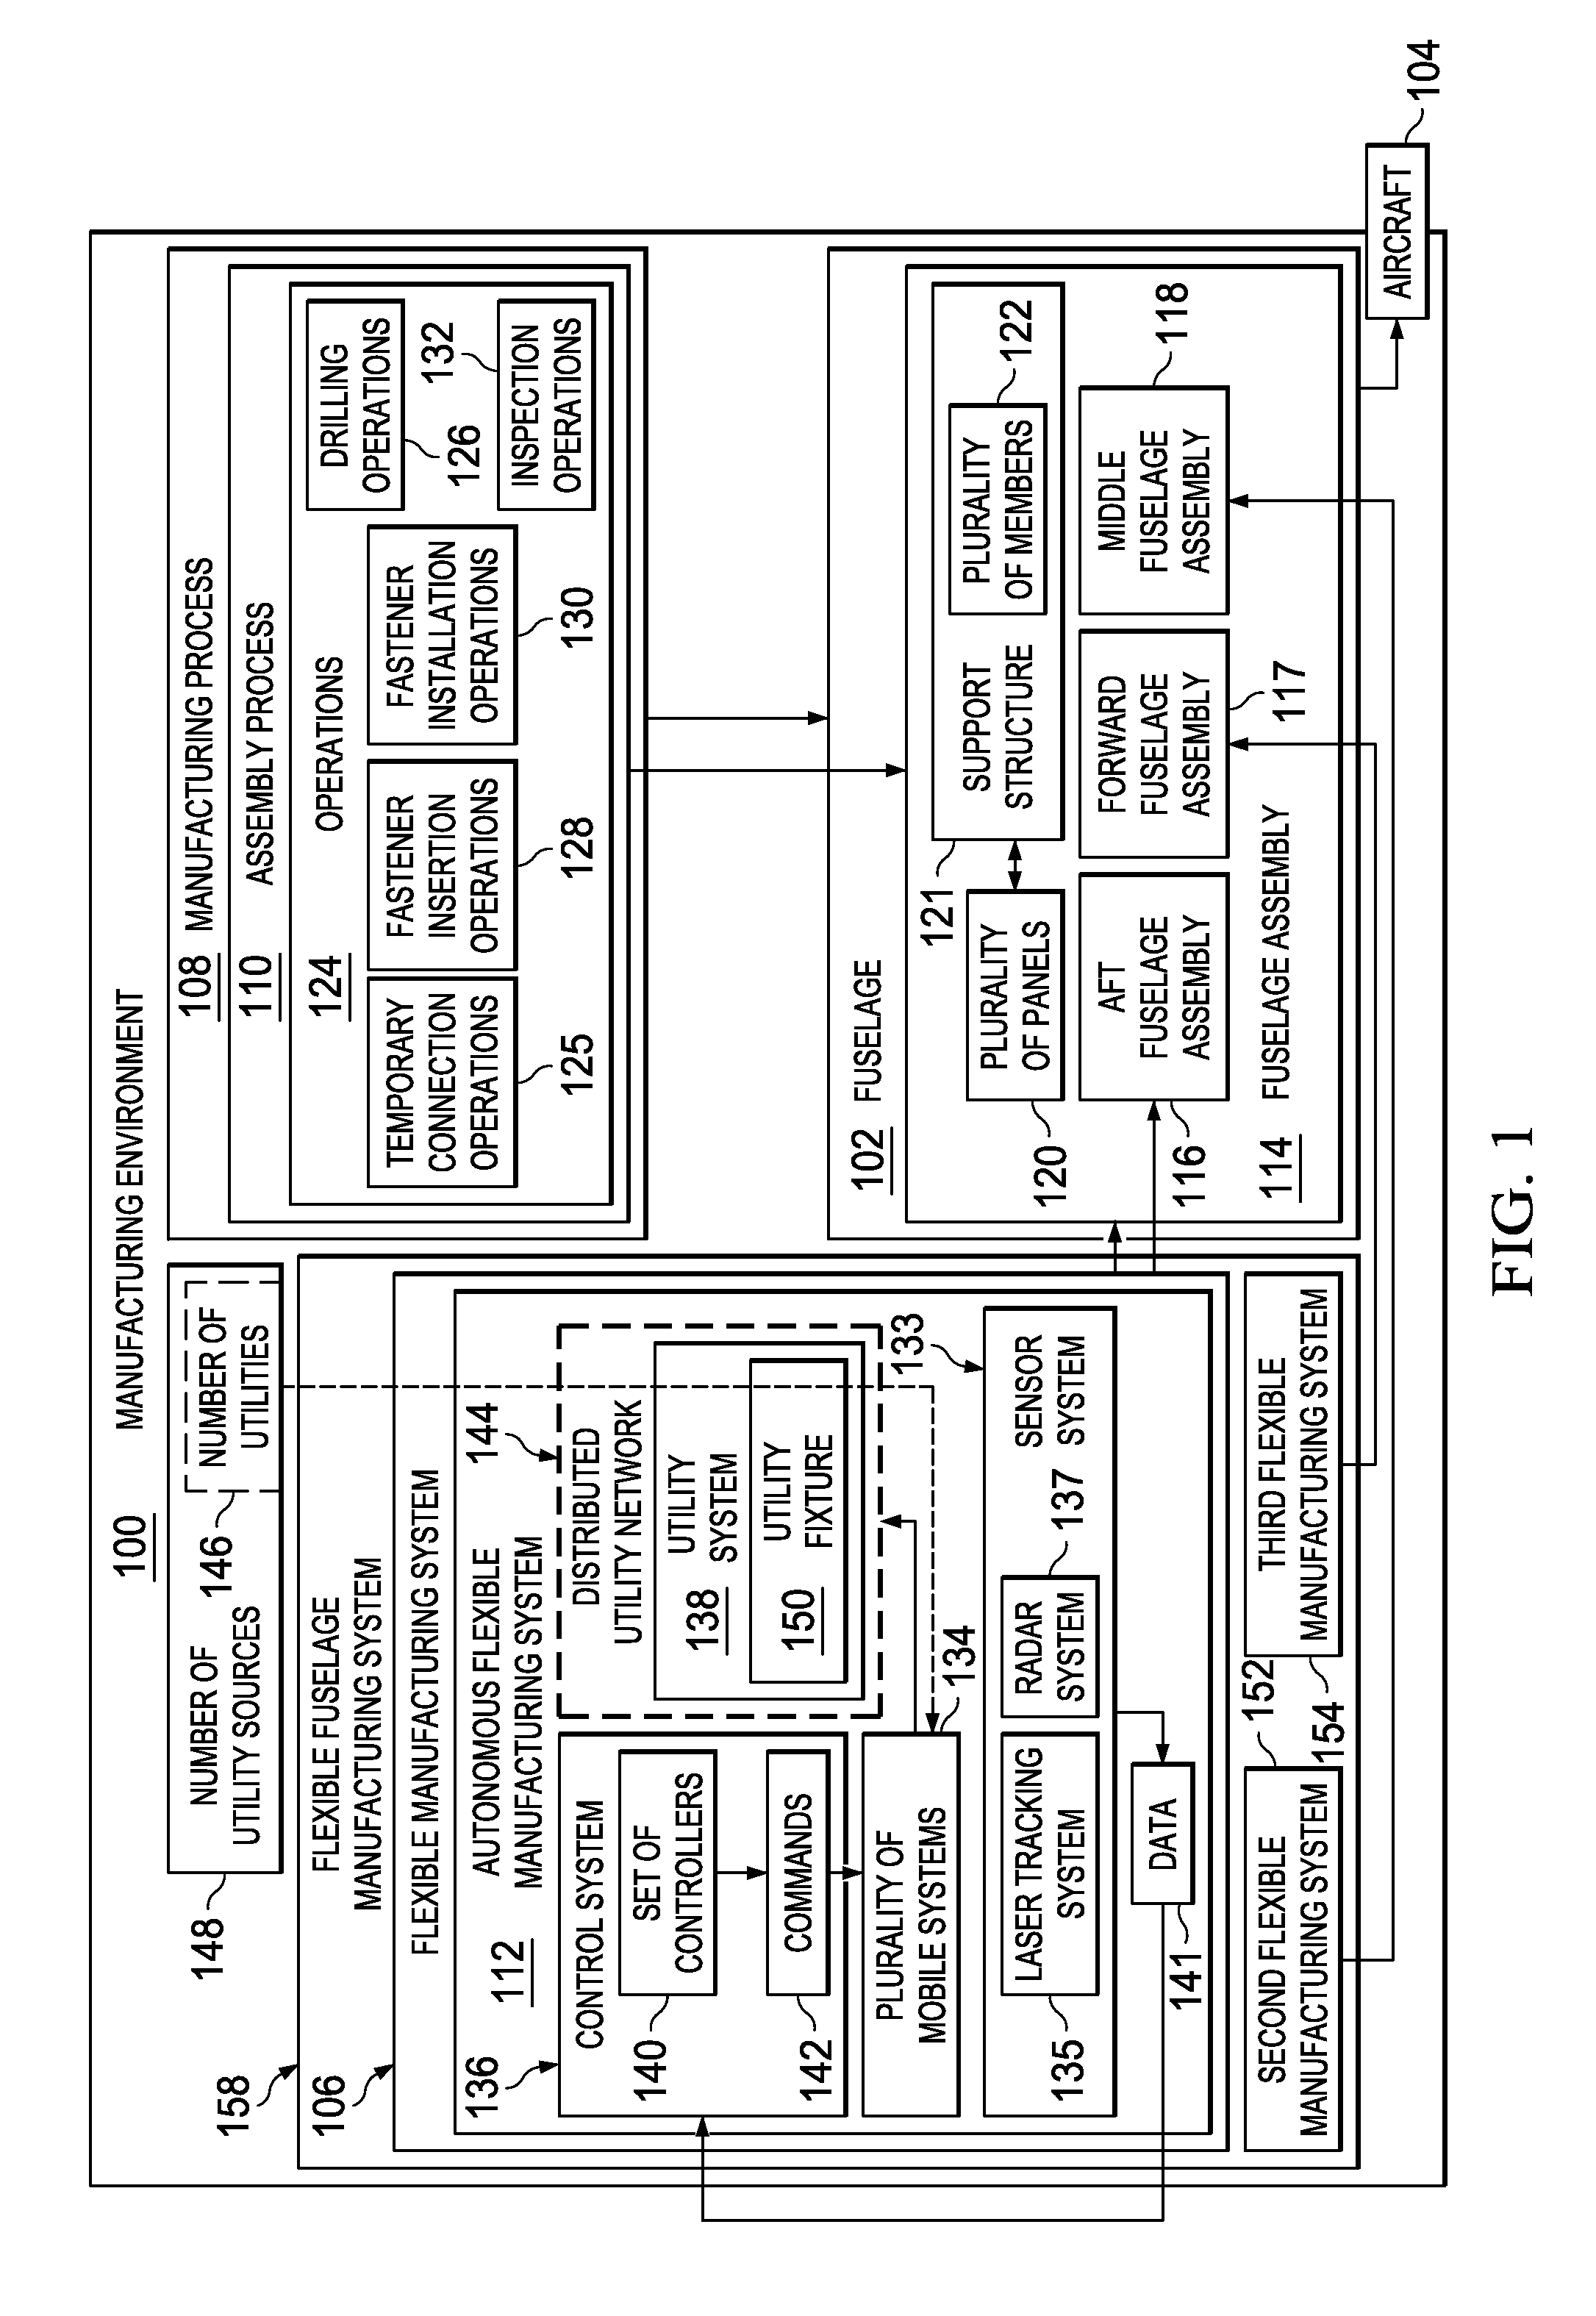 Utility Fixture for Creating a Distributed Utility Network